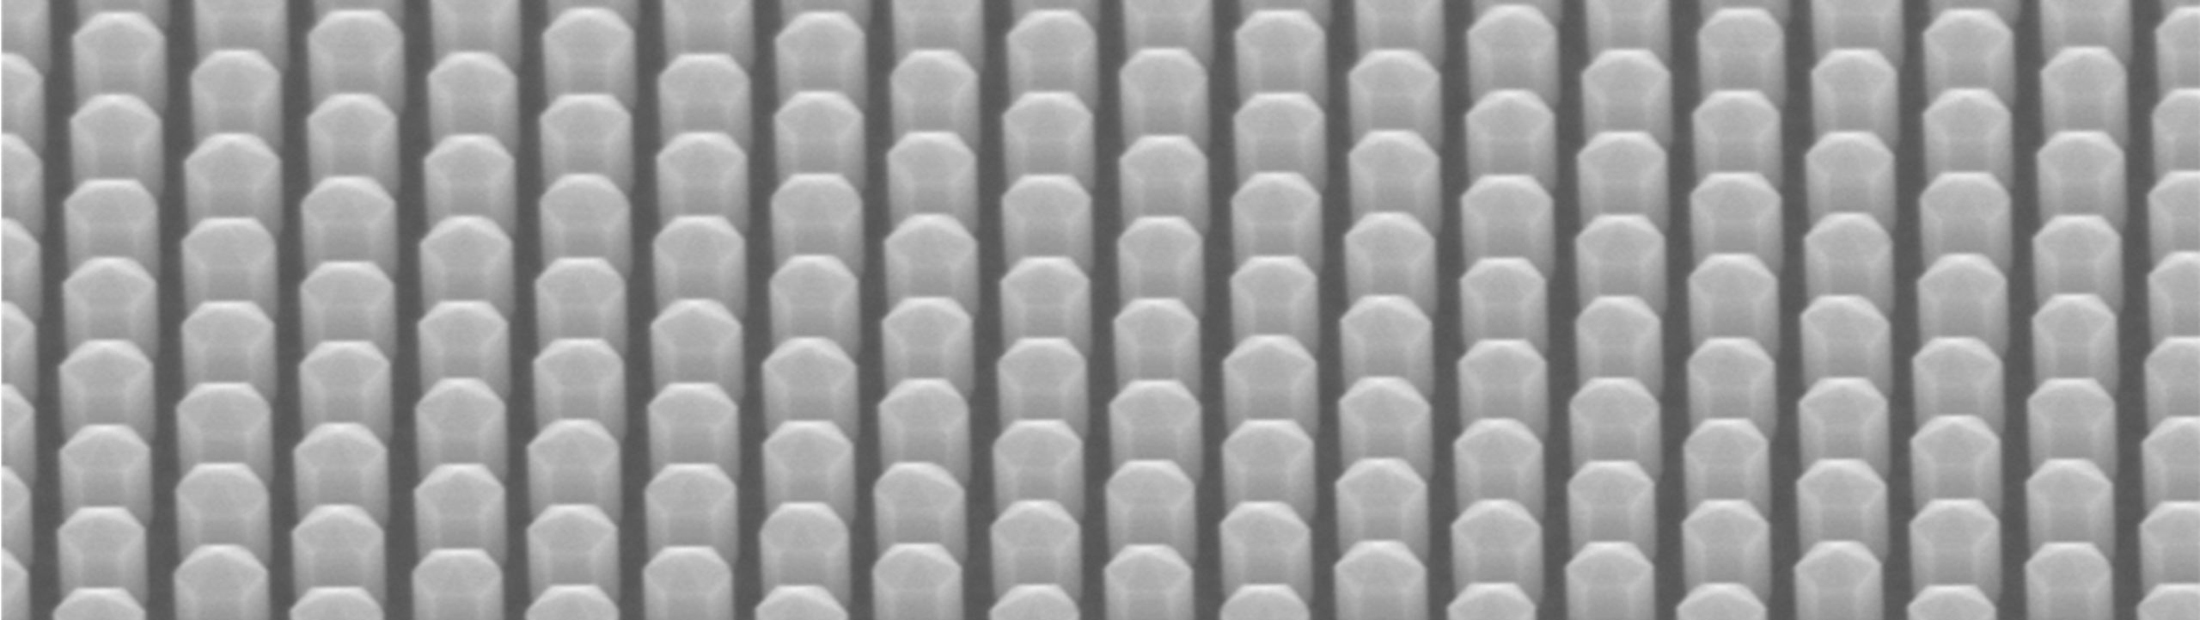 III-nitride nanostructures imaged by scanning electron microscopy